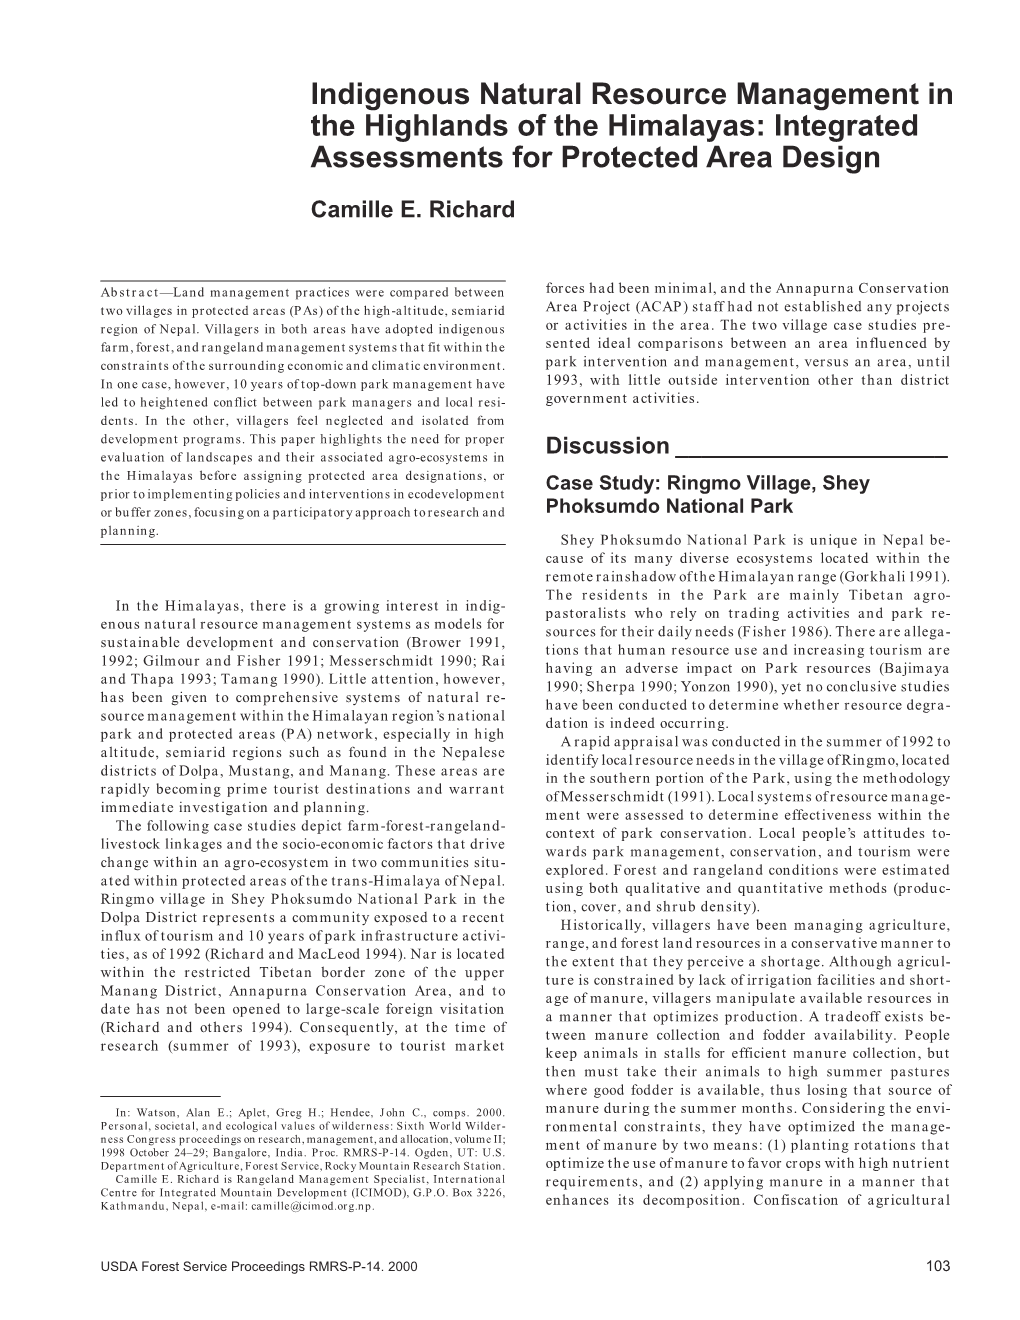 Integrated Assessments for Protected Area Design